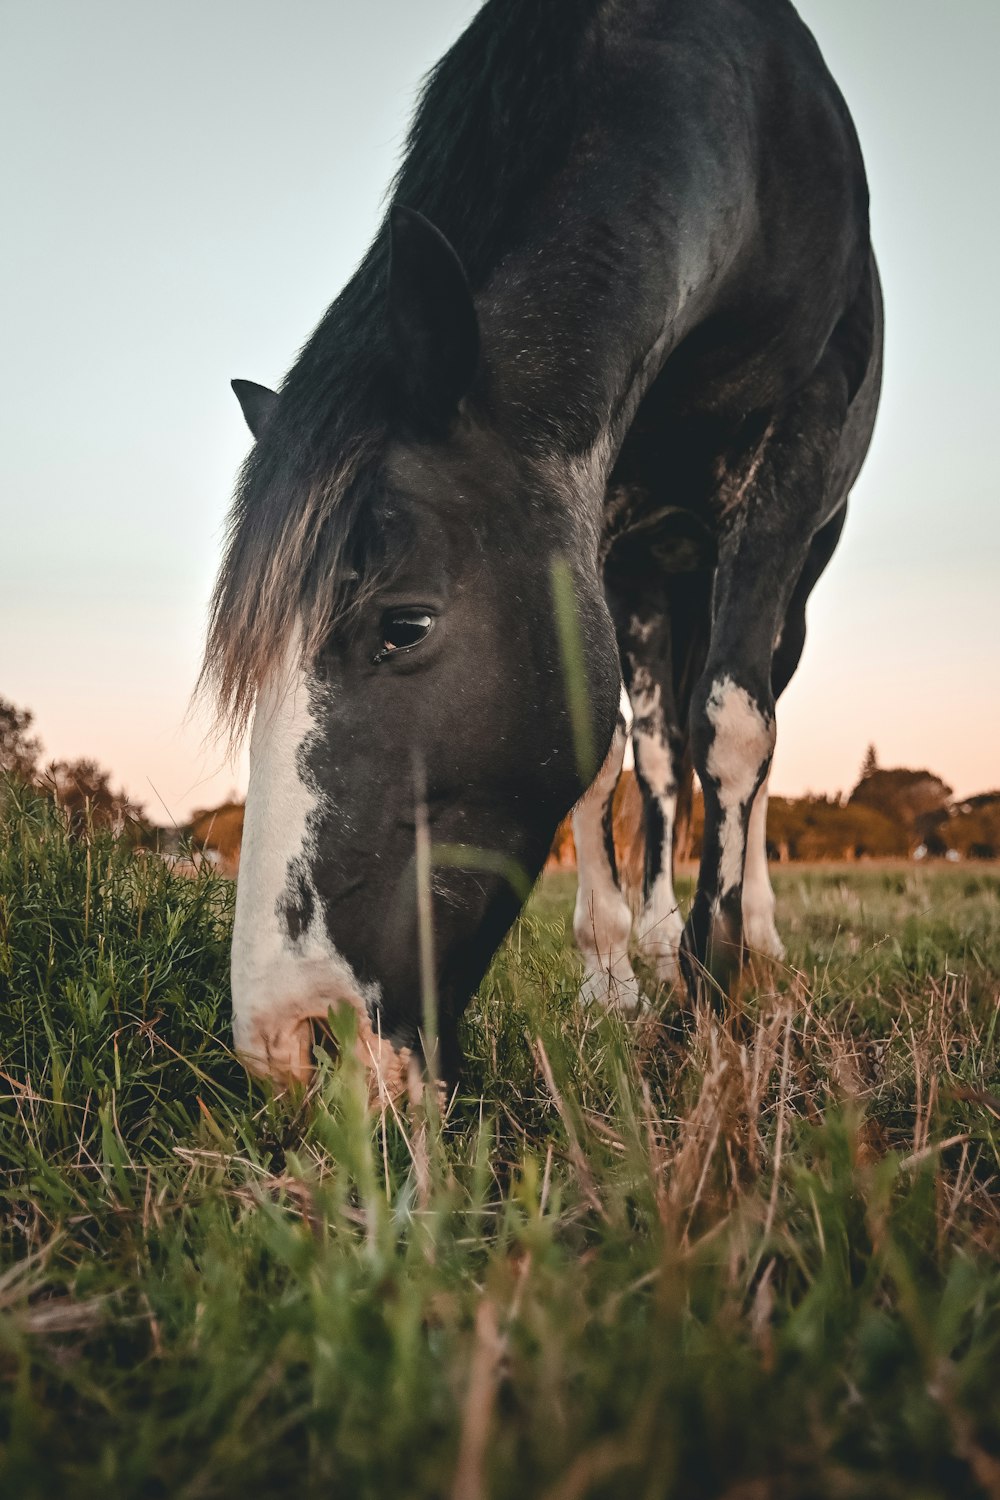 black and white horse on green grass field during daytime